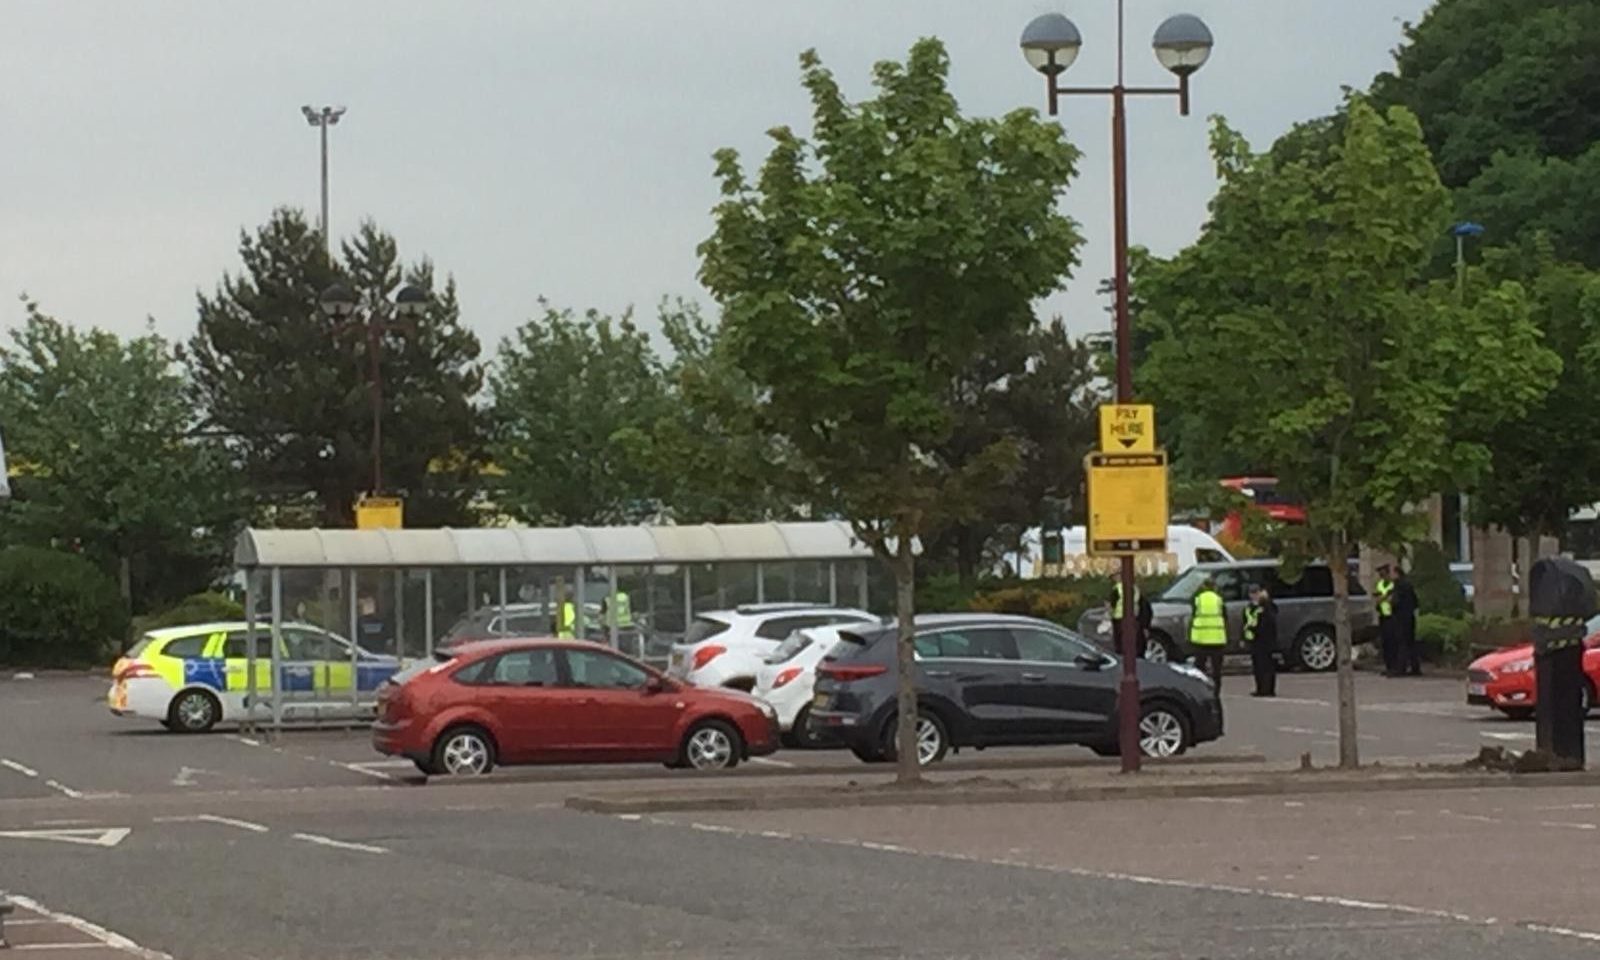 Police were called to a disturbance at Morrisons supermarket in Inverness this morning